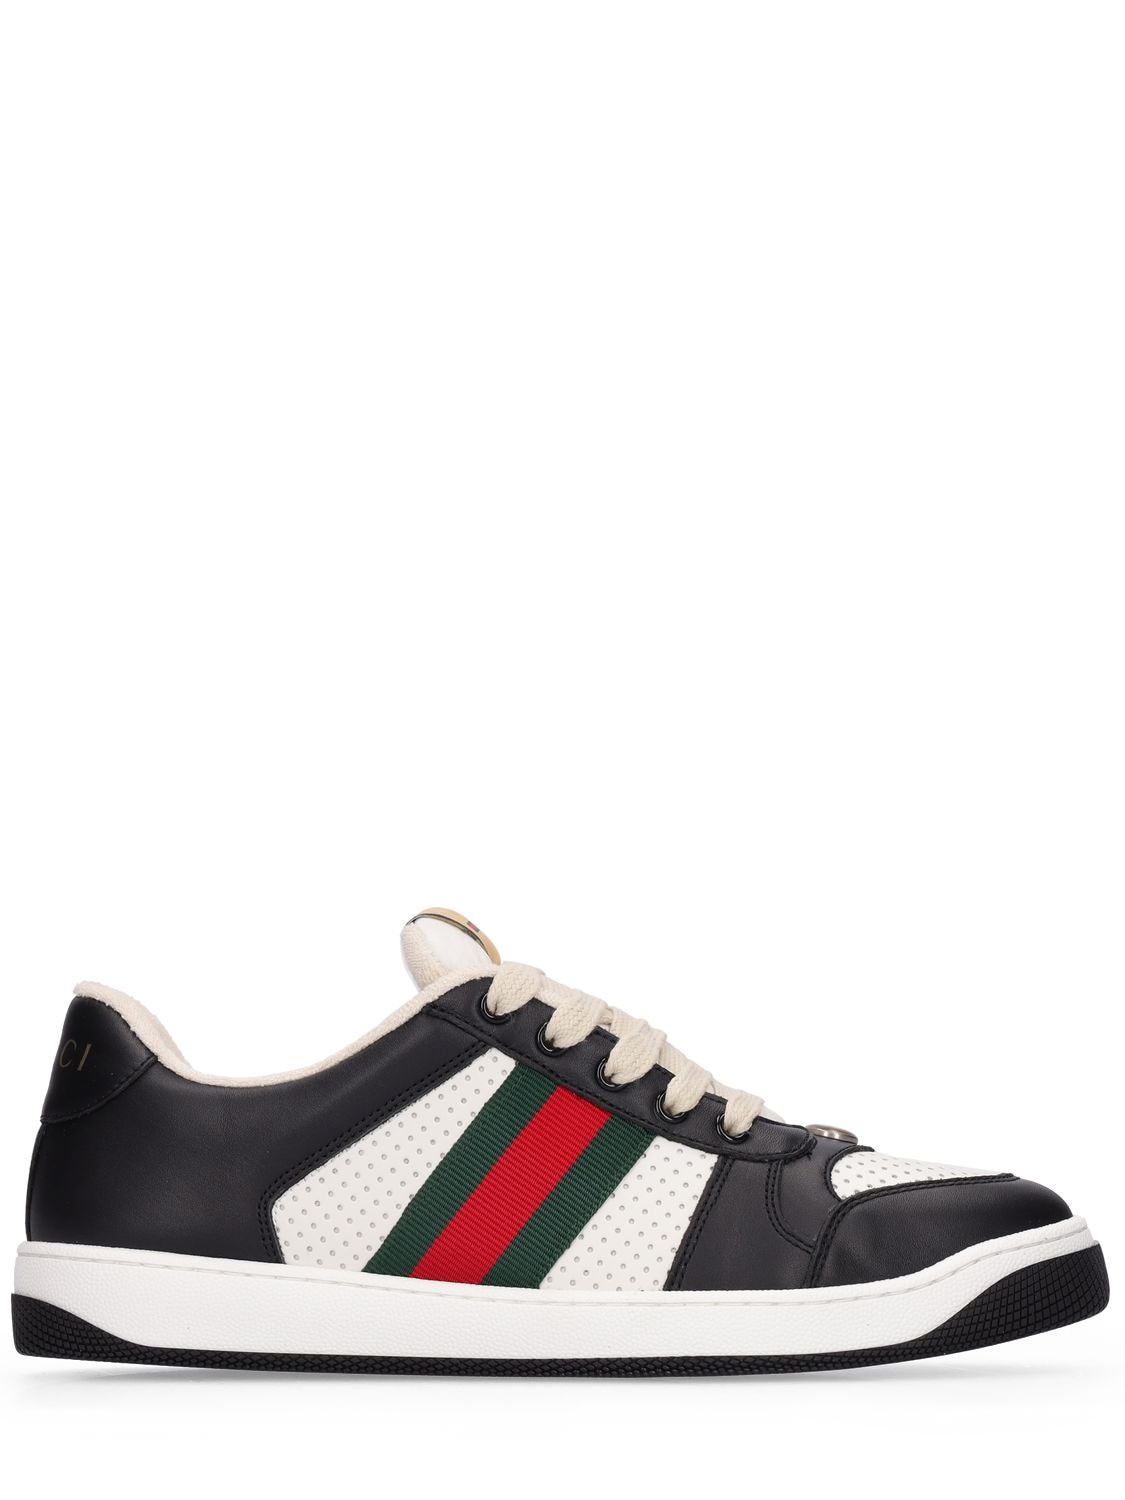 GUCCI 20mm Screener Leather Sneakers